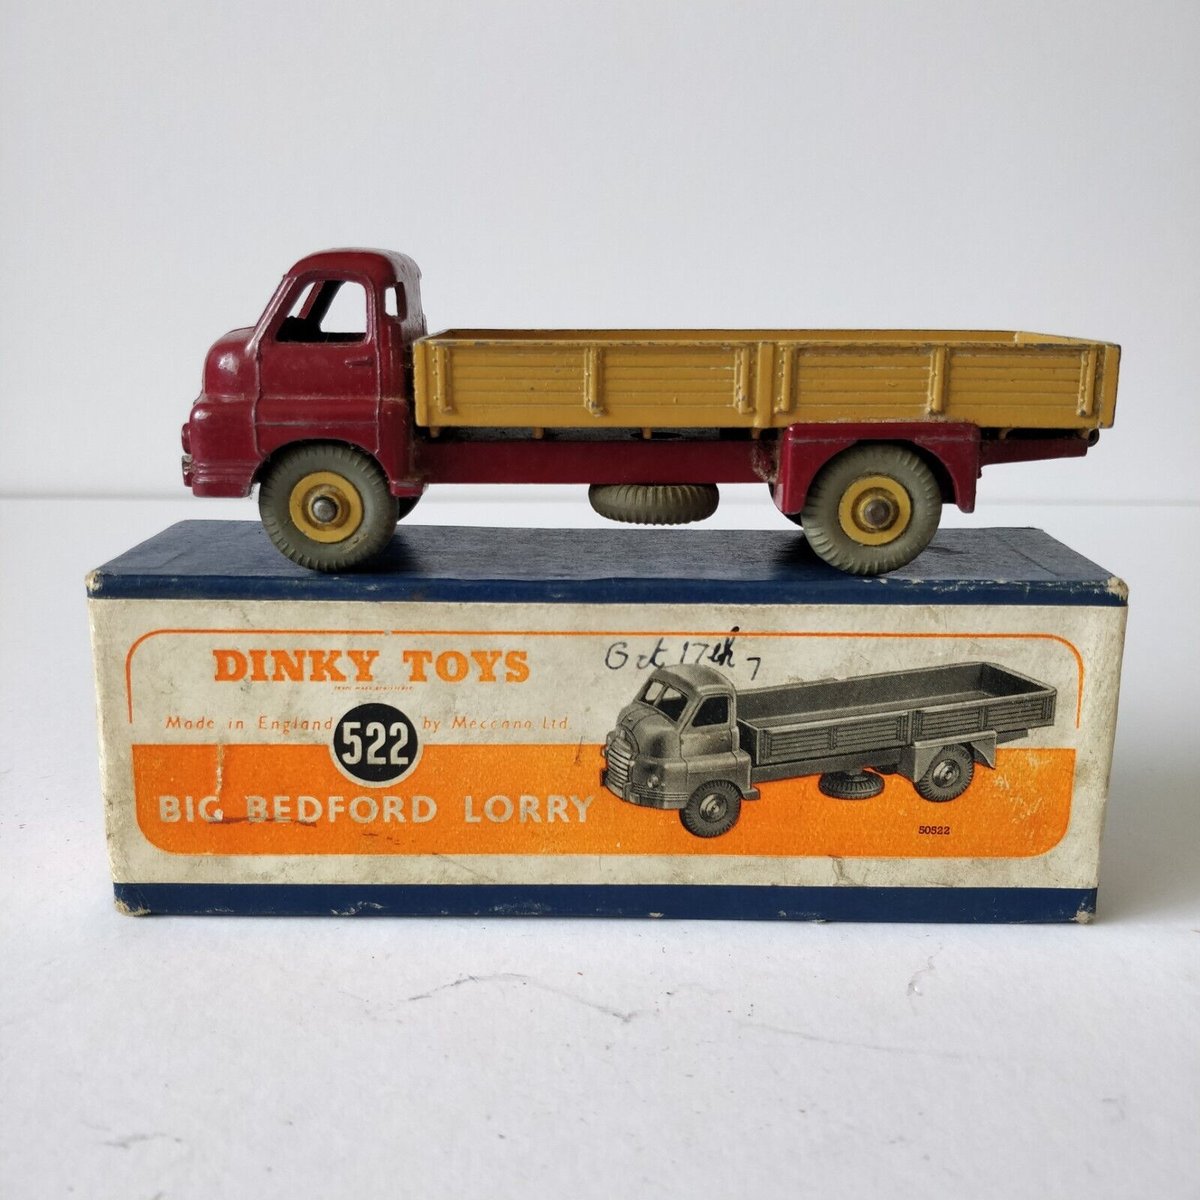 Image of Dinky Toys Big Bedford Lorry 522 with Original Box Meccano Limited c. 1950s